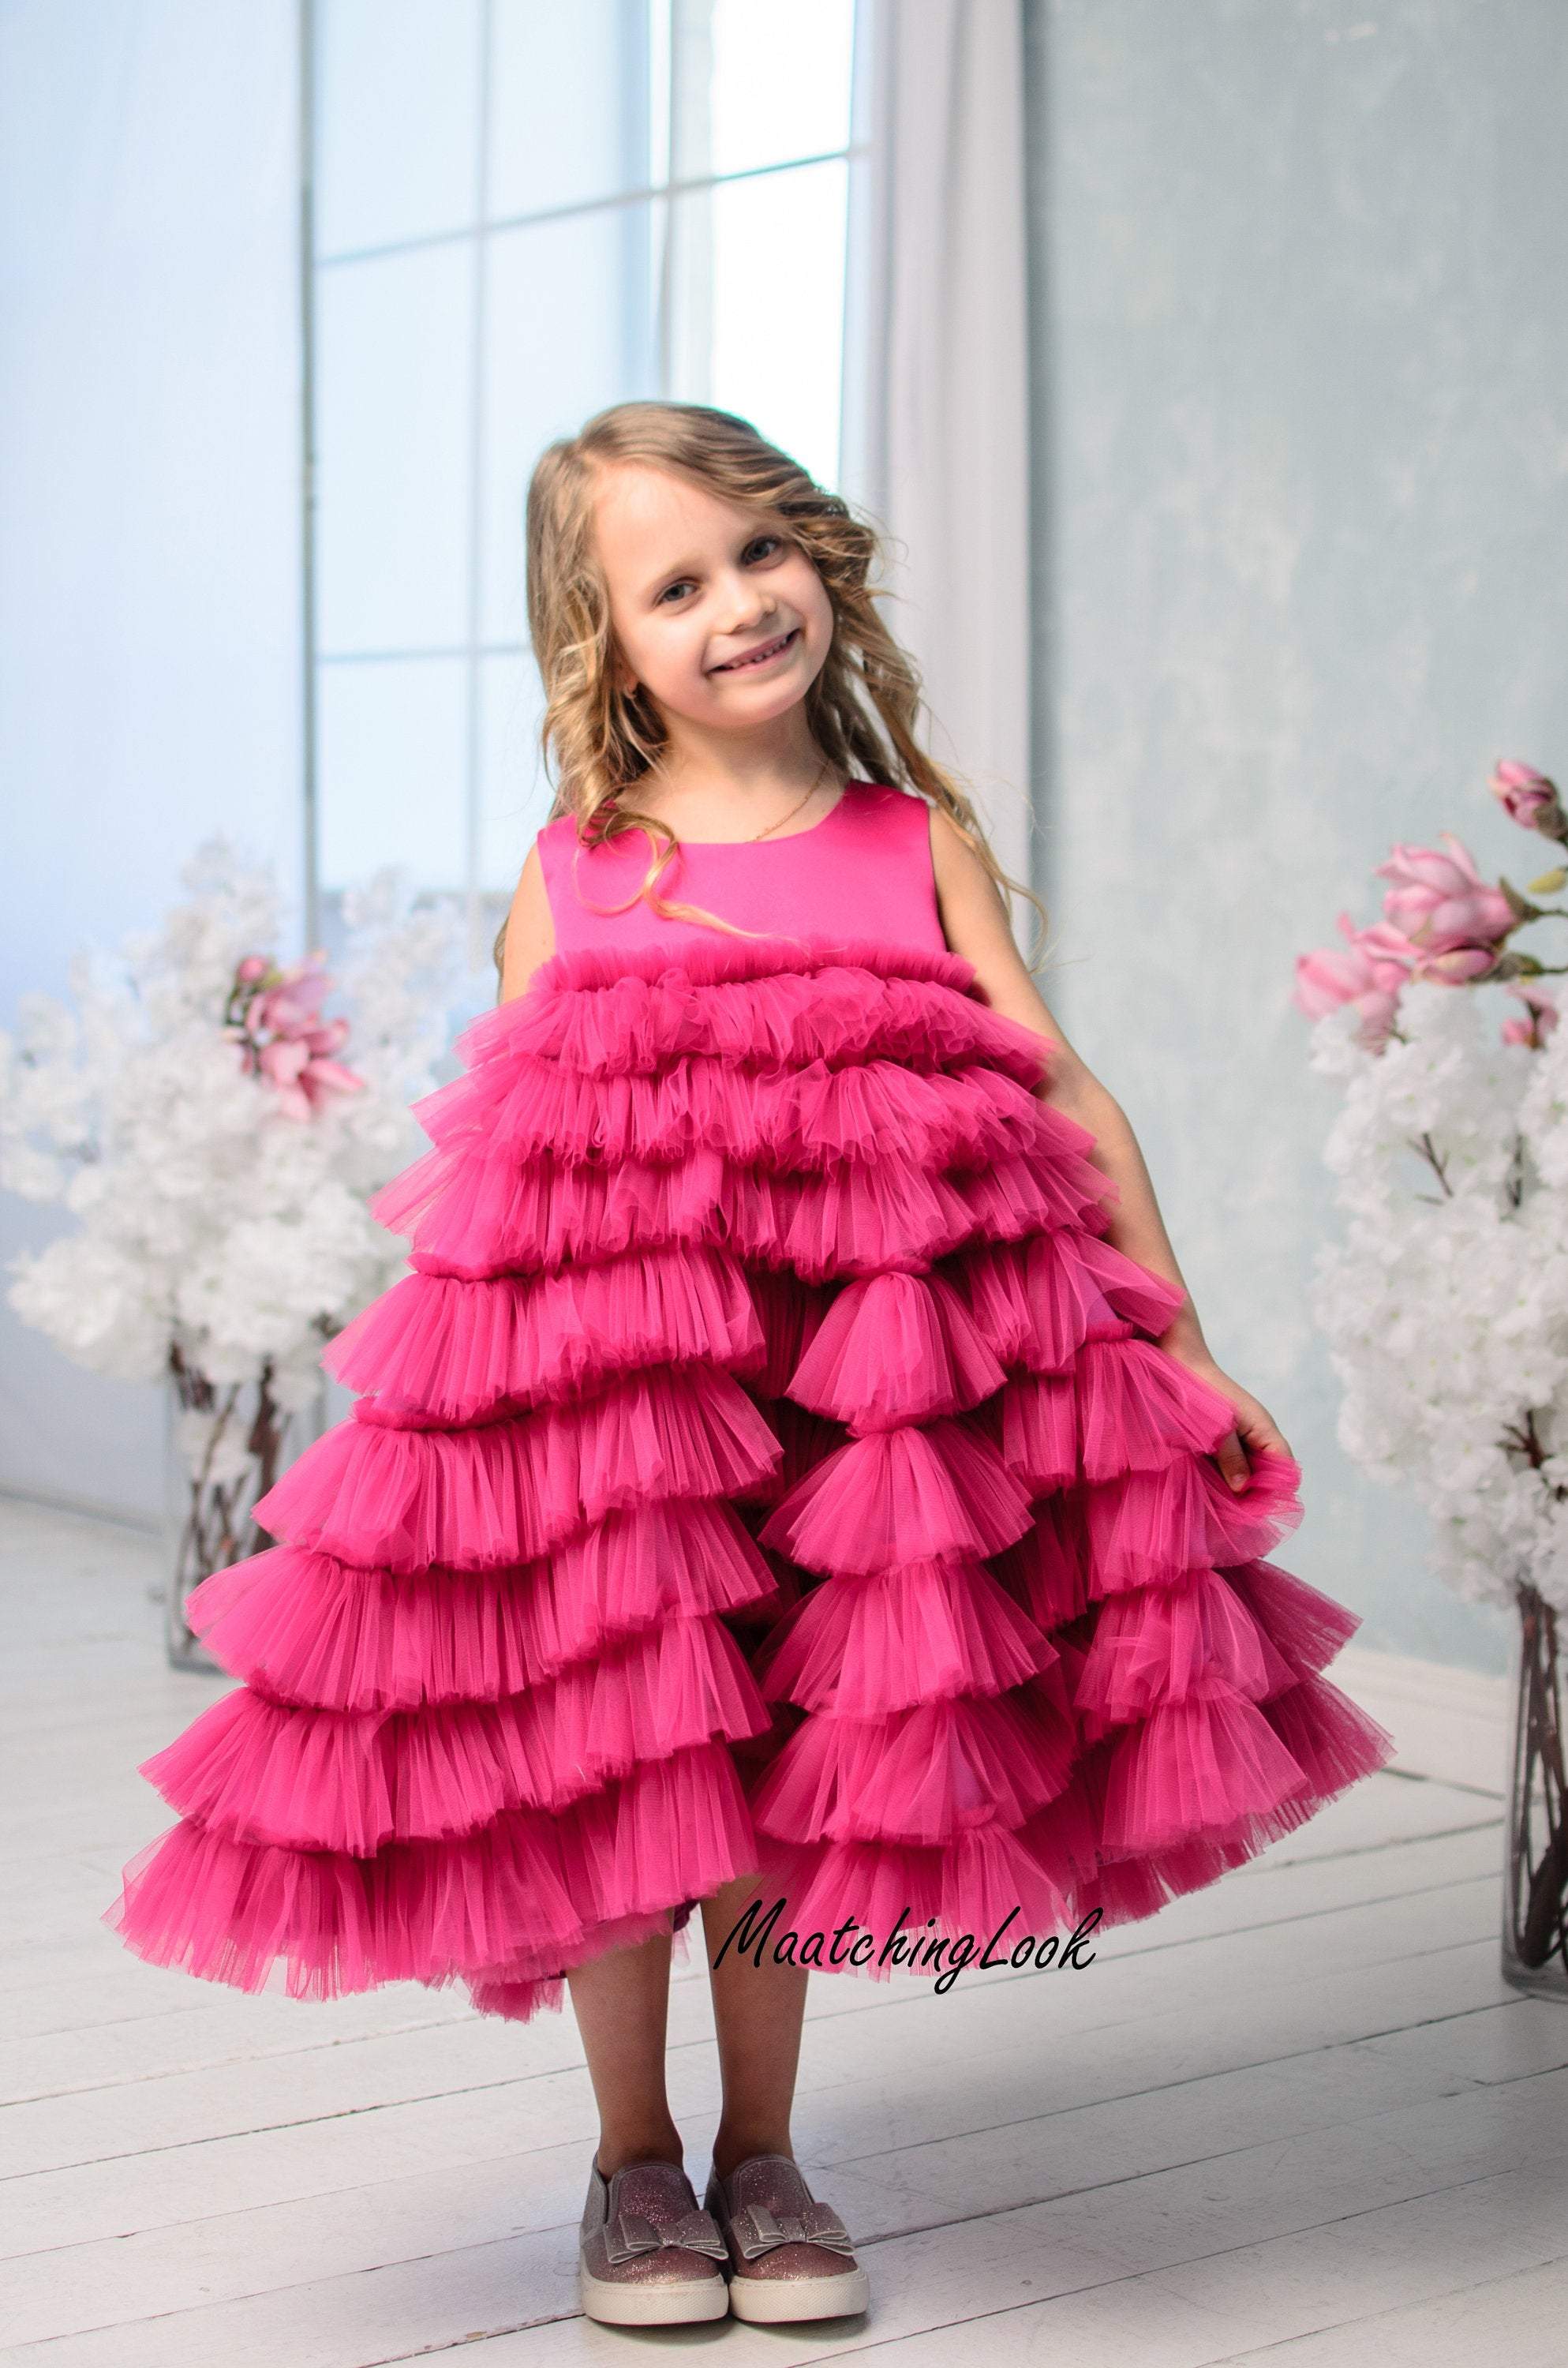 New Baby's Gorgeous Gown Dress Cute Big Bow Lace Wedding - Temu